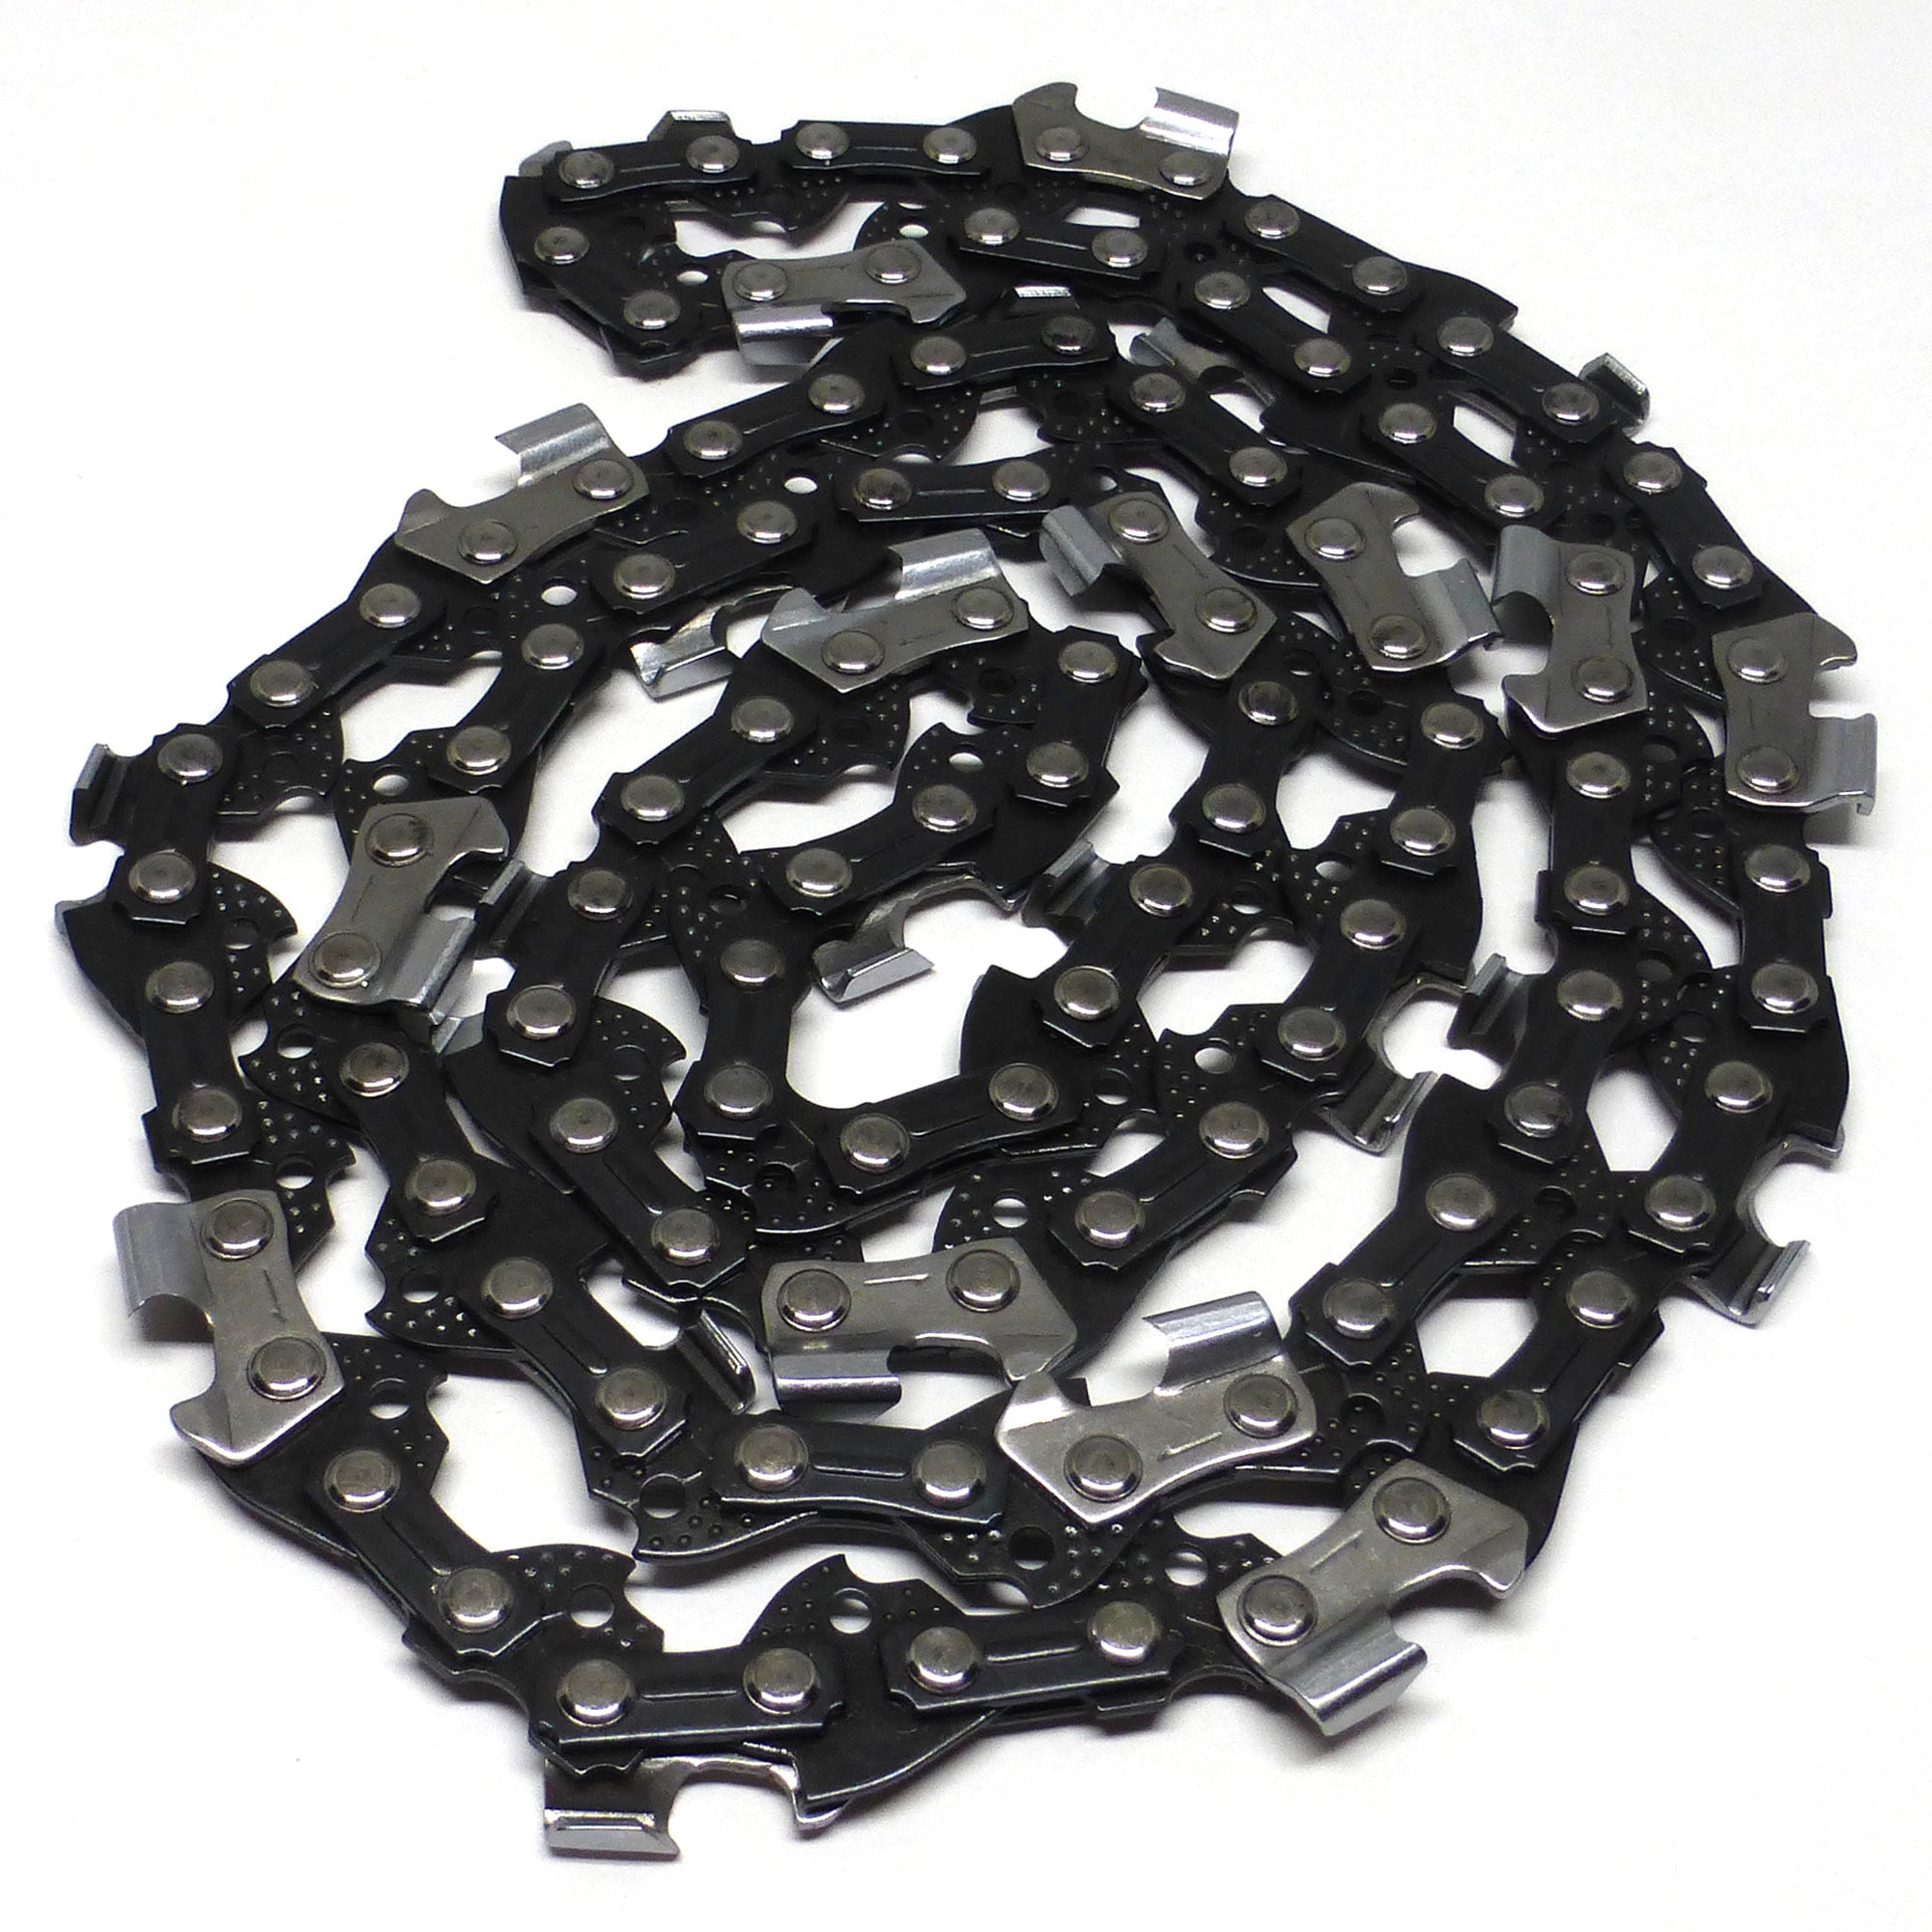 MS 211-3/8" 0.050" 55 DL 6x 16" Semi Chisel Chainsaw Chain for Stihl MS250 